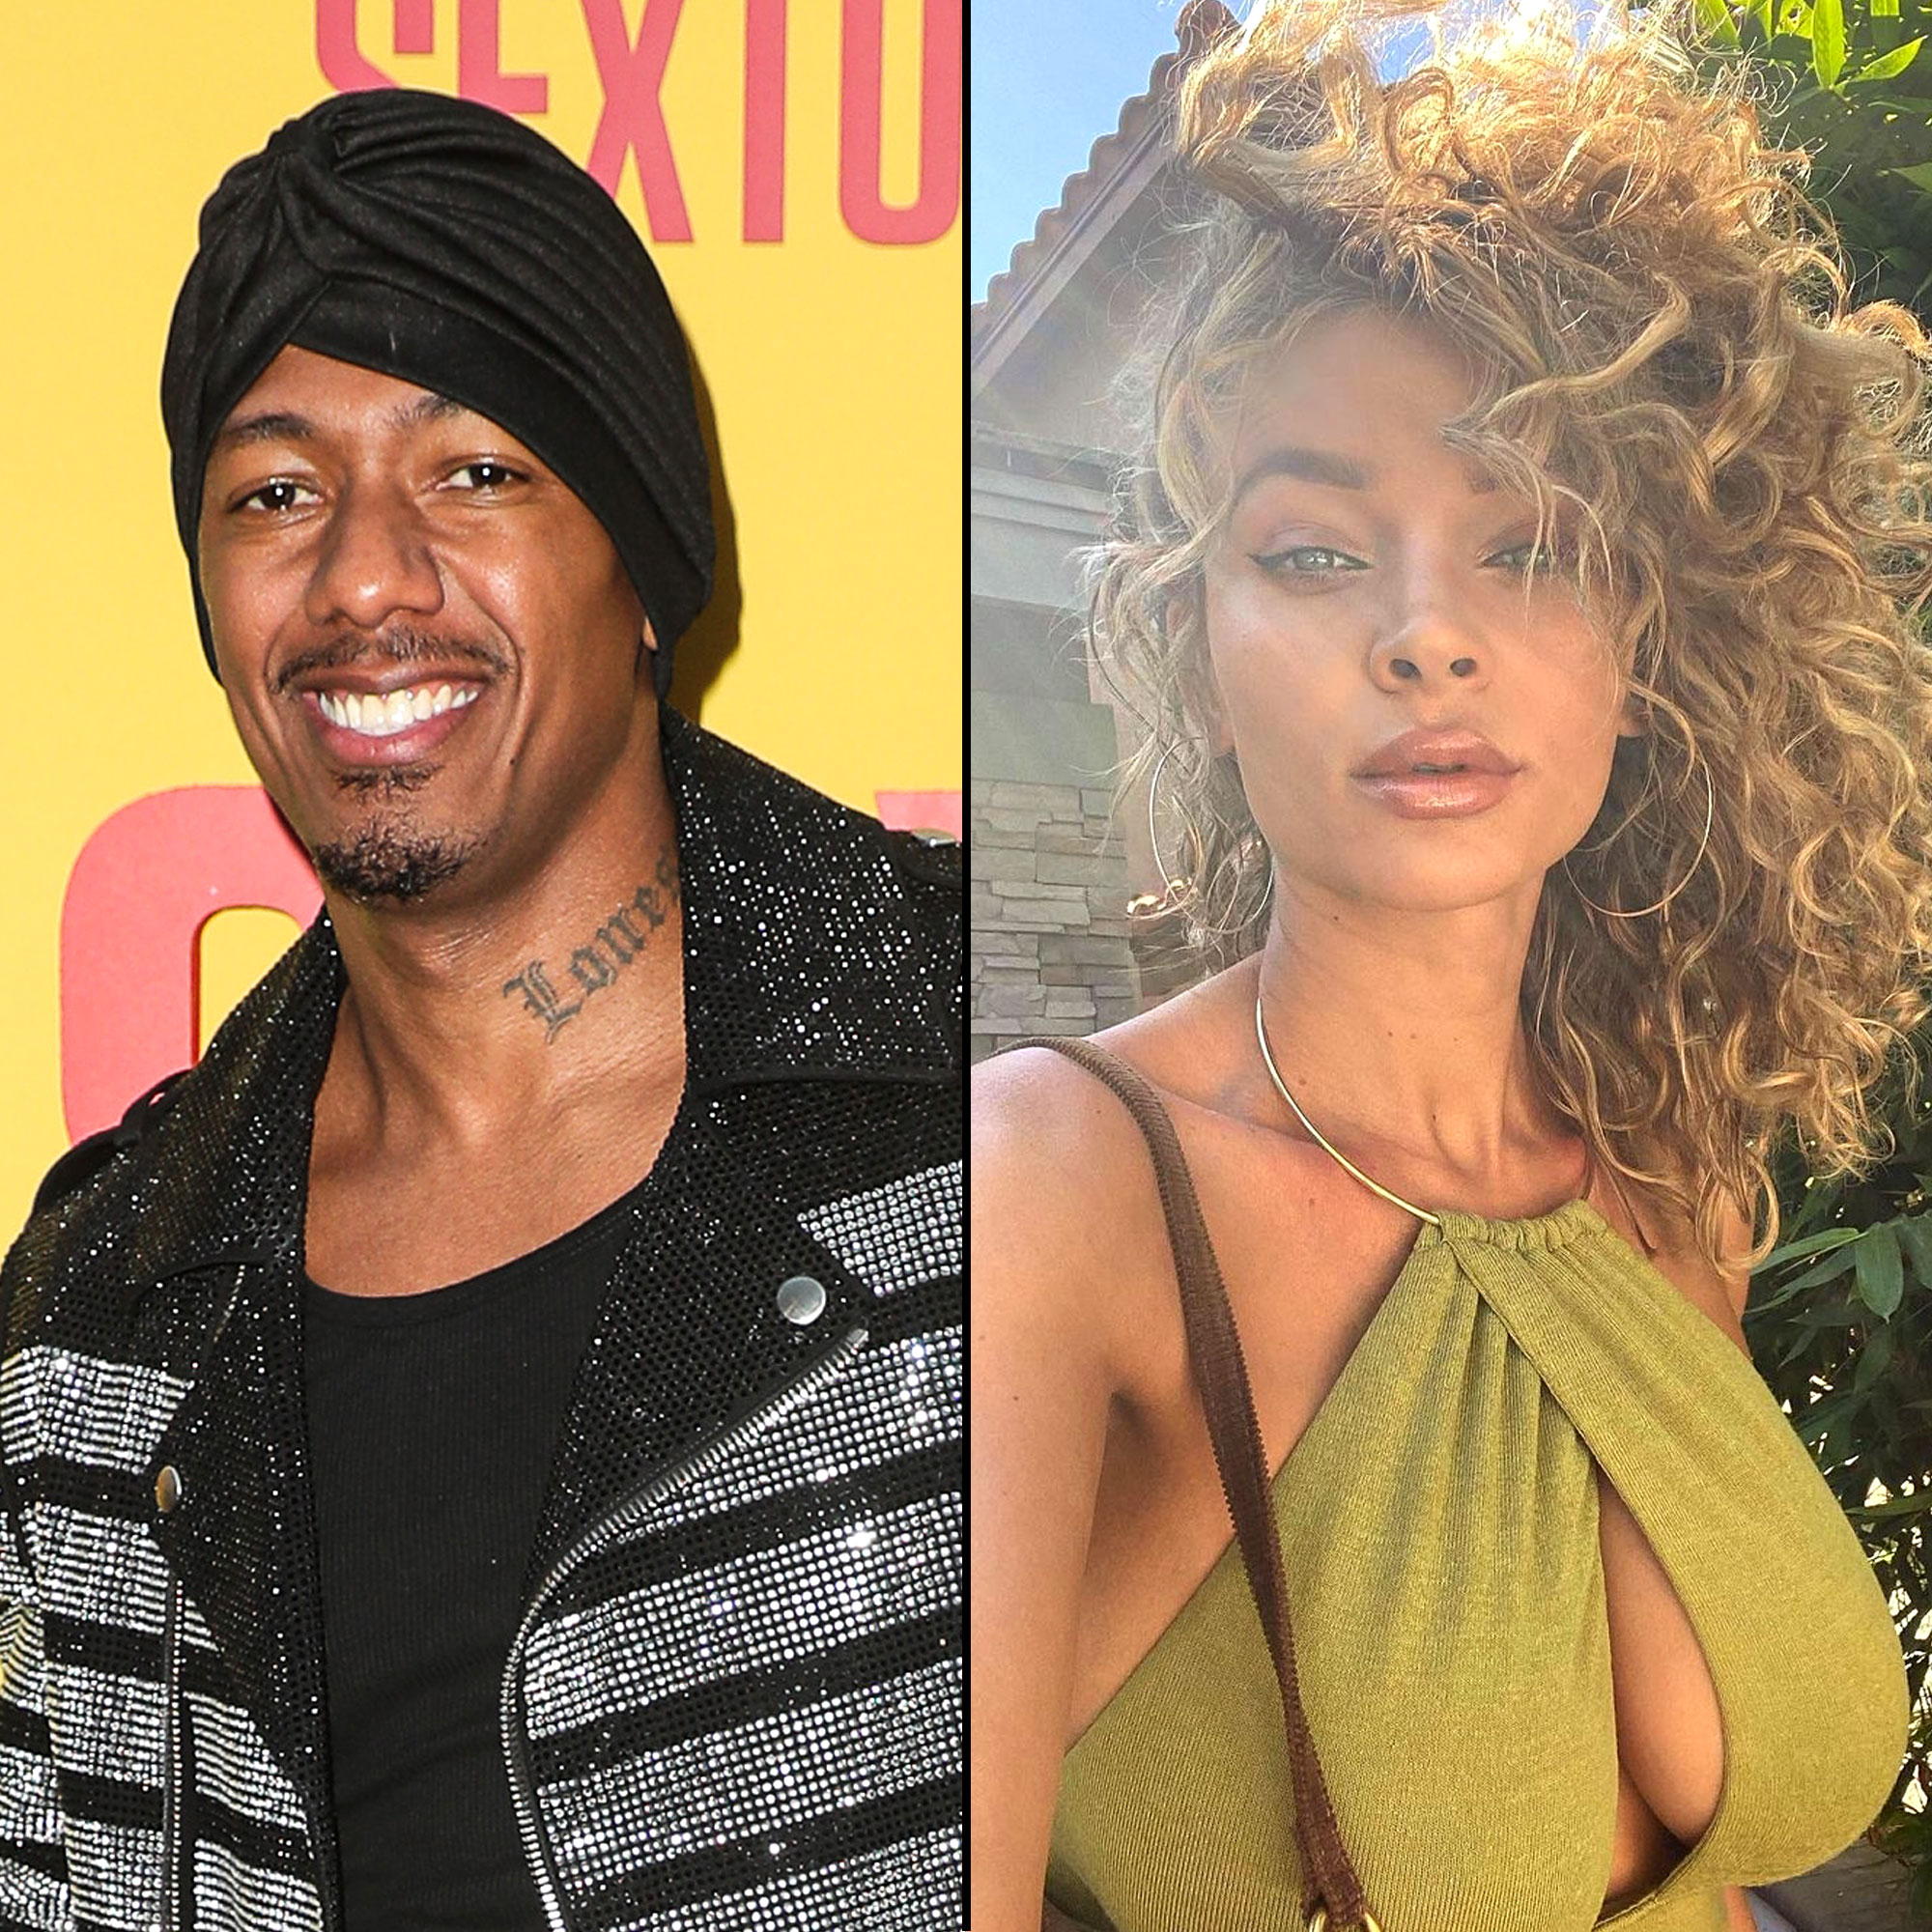 Nick Cannon and Alyssa Scotts Relationship Timeline